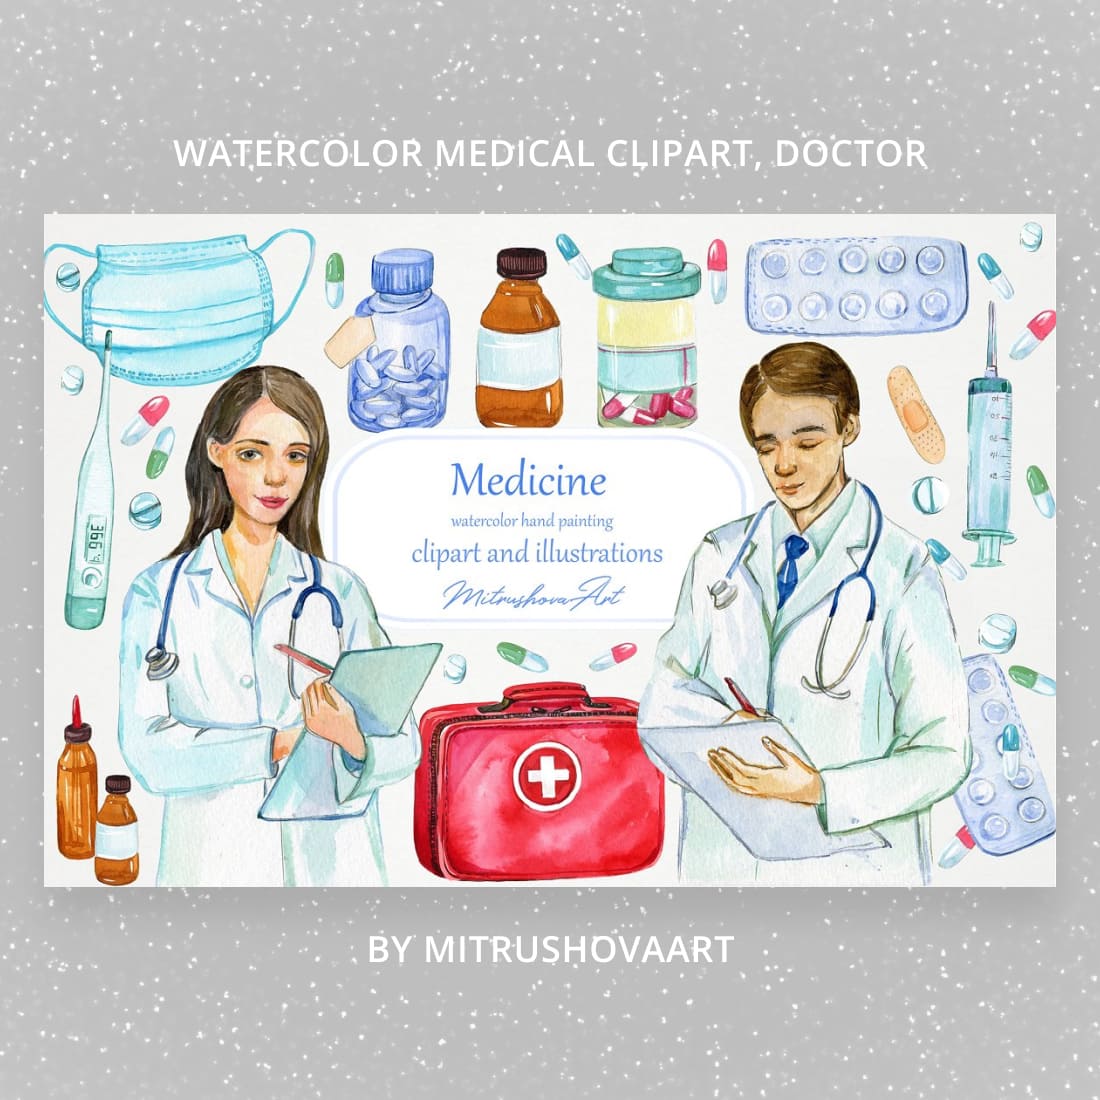 watercolor medical clipart doctor cover image.